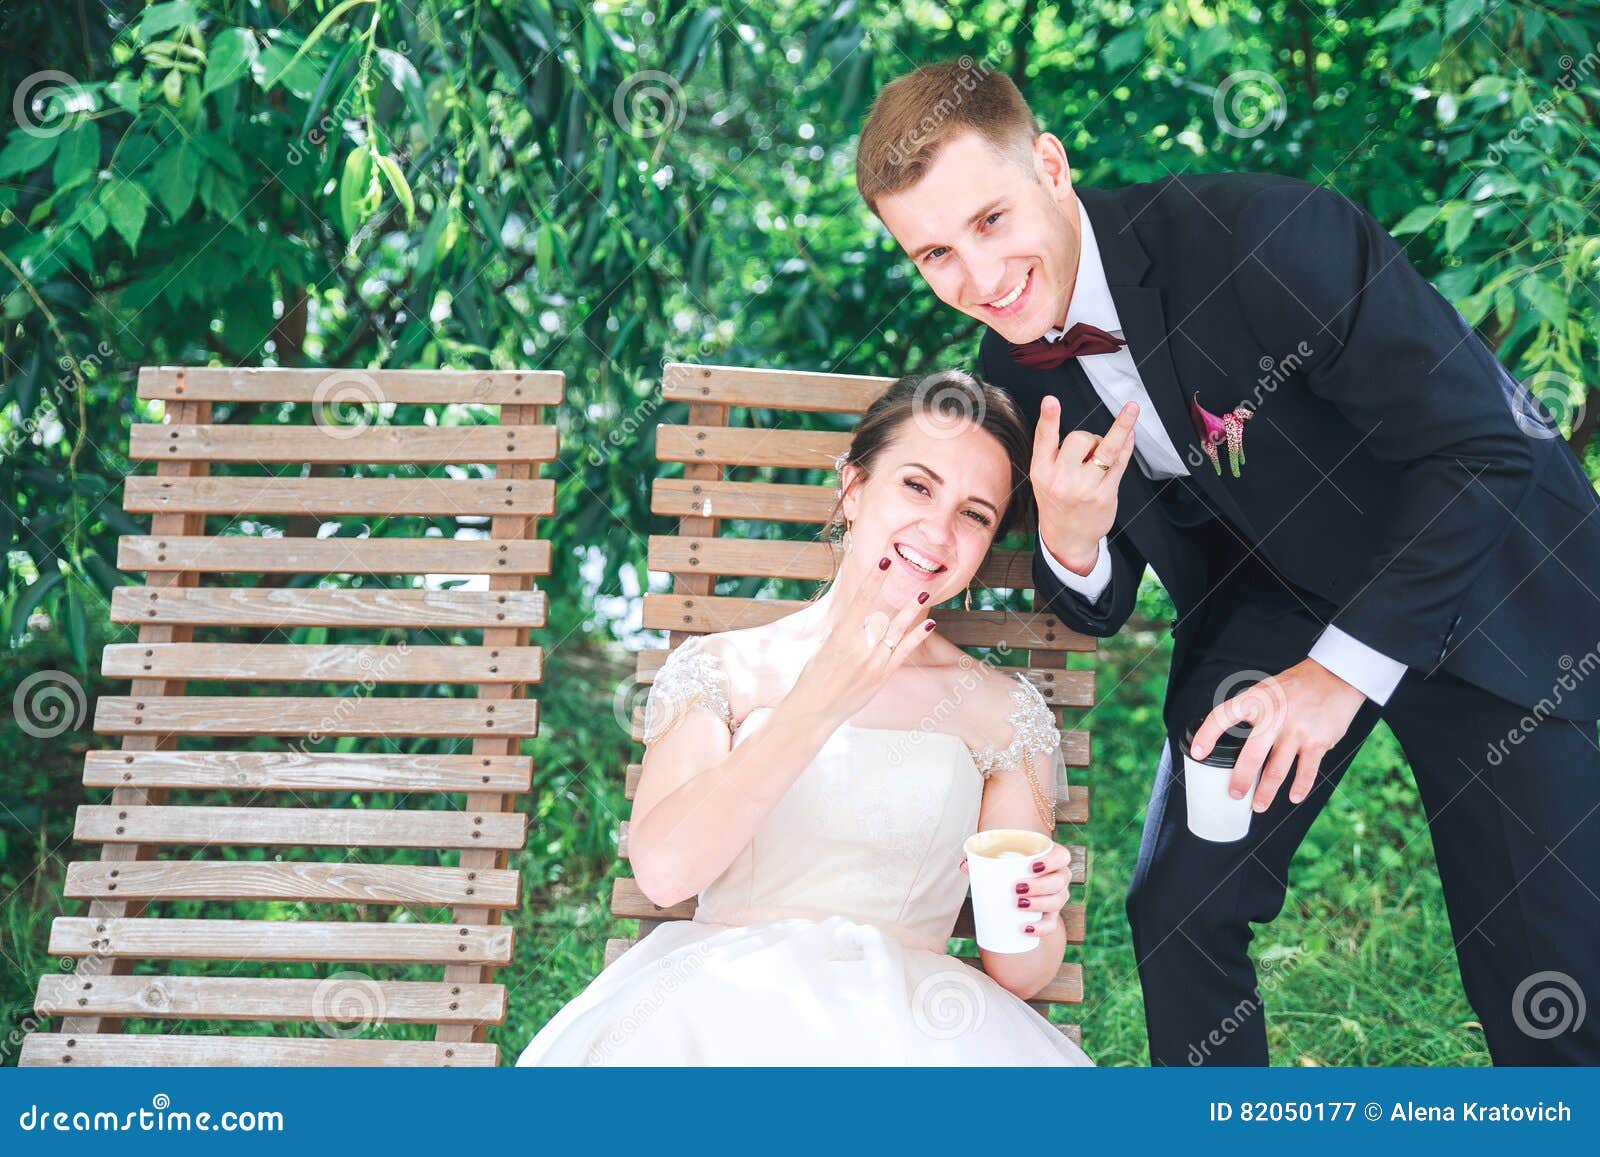 Young Beautiful Bride And Groom Drinking Coffee At The Outdoors